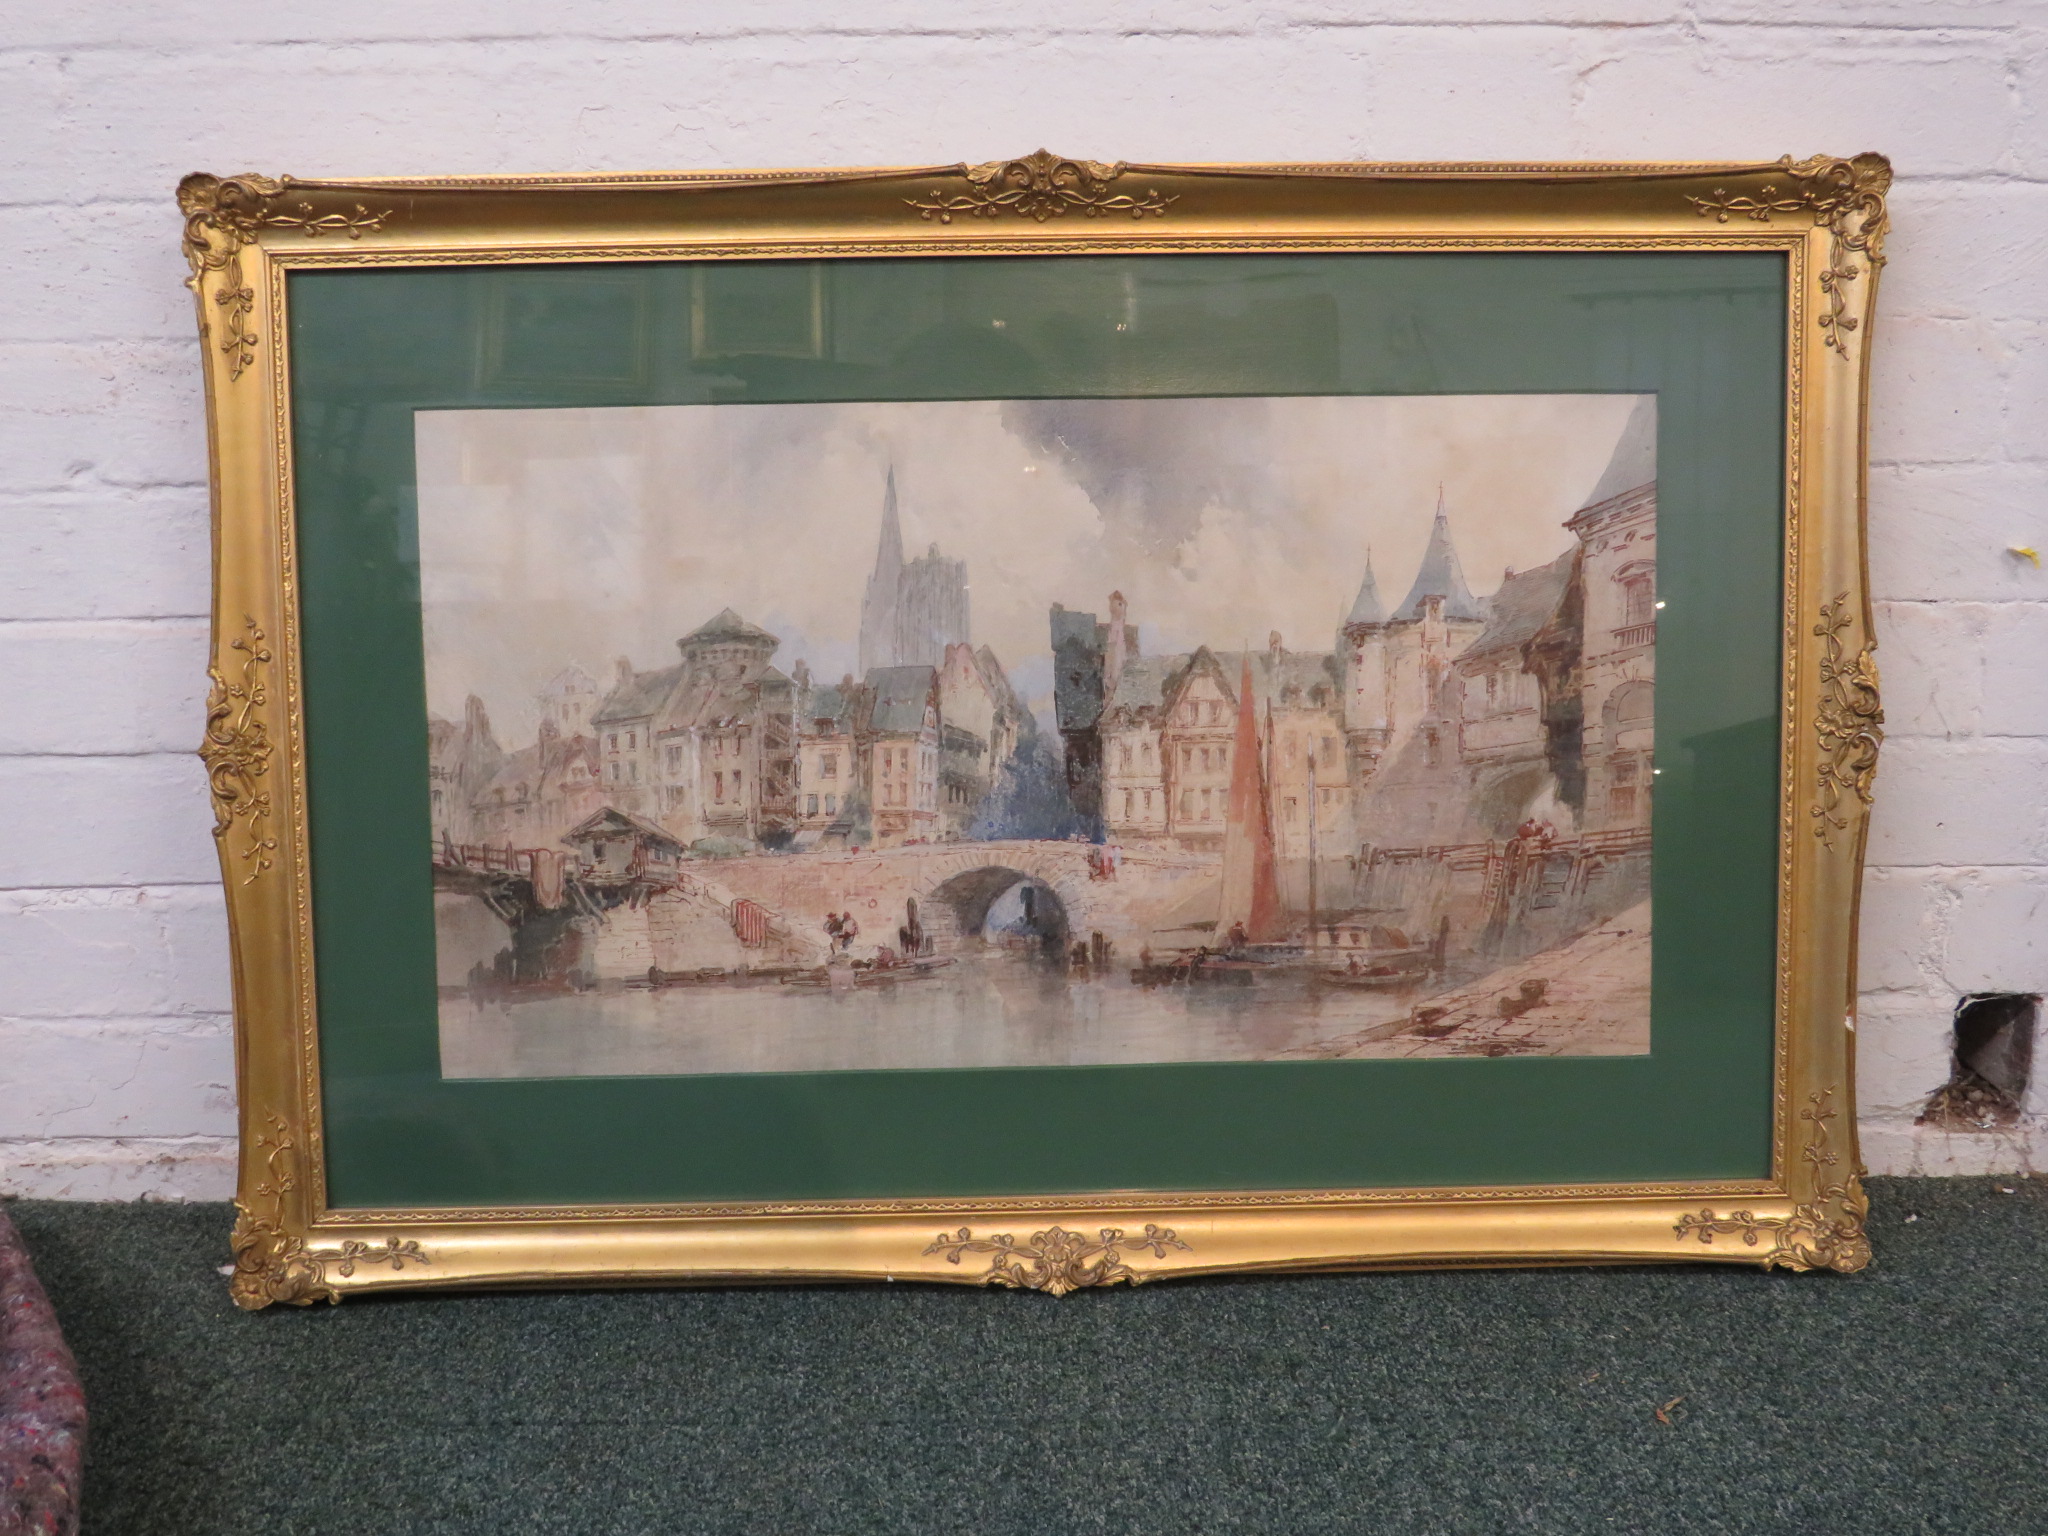 Attributed to Paul Marny - view of Mayenne harbour with church spire beyond, watercolour over pen - Image 2 of 5